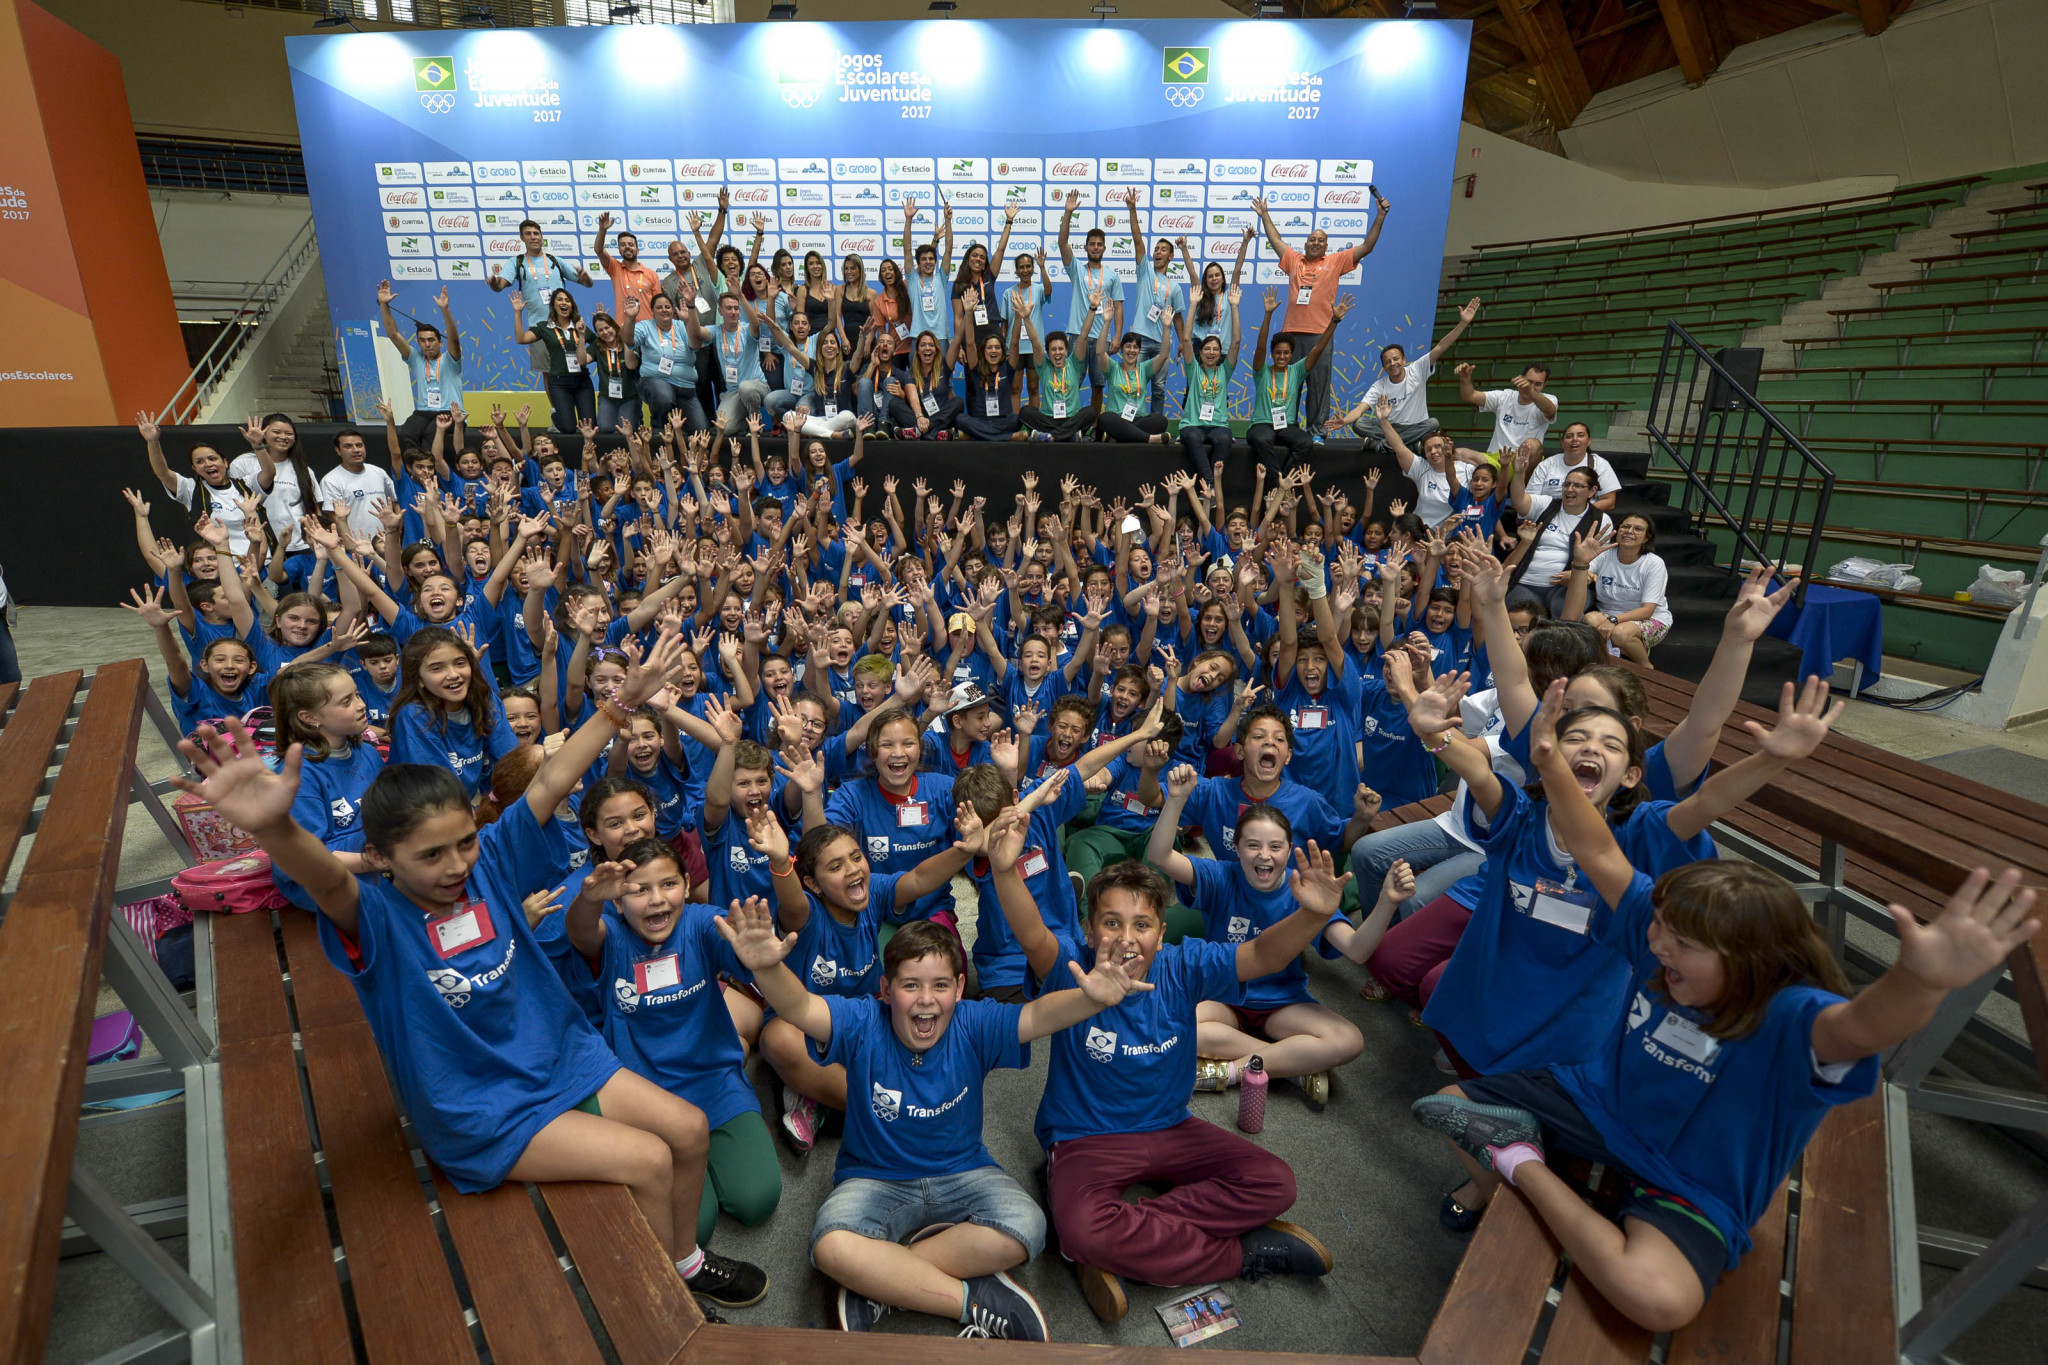 The Brazilian Olympic Committee has received its Olympism in Action Trophy in recognition of sustainability initiatives at the 2019 Youth School Games ©COB